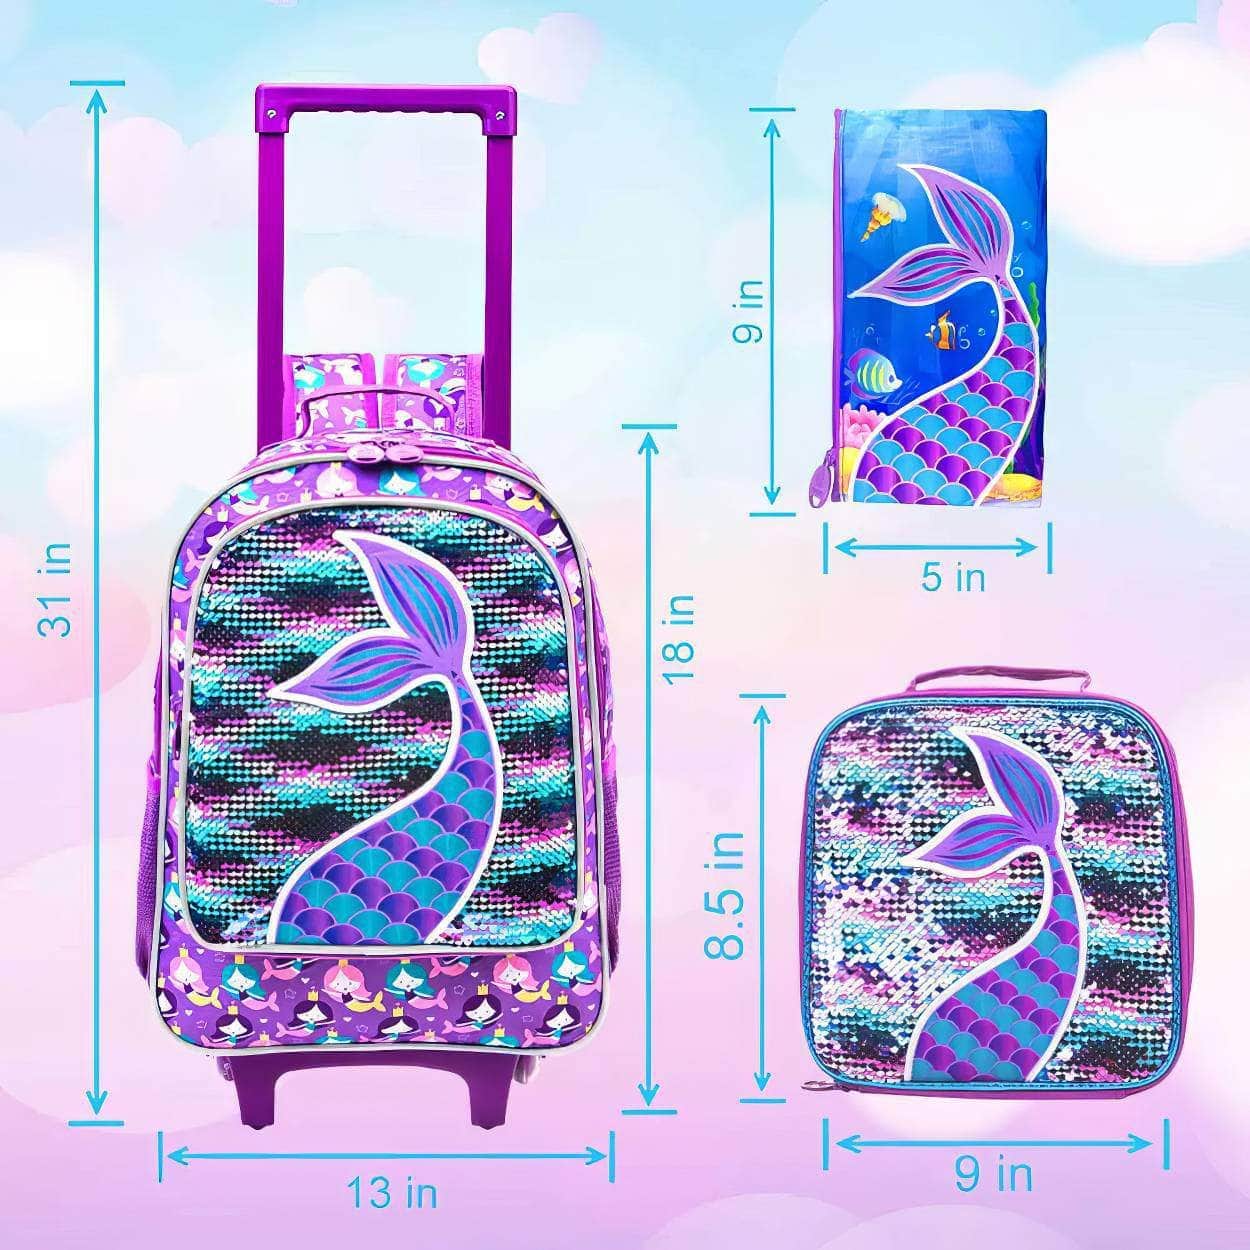 Girls' 3PCS Rolling Backpack Set - Pink Fishtail Design with Glow-in-the-dark Function, Roller Wheels, and Lunch Bag